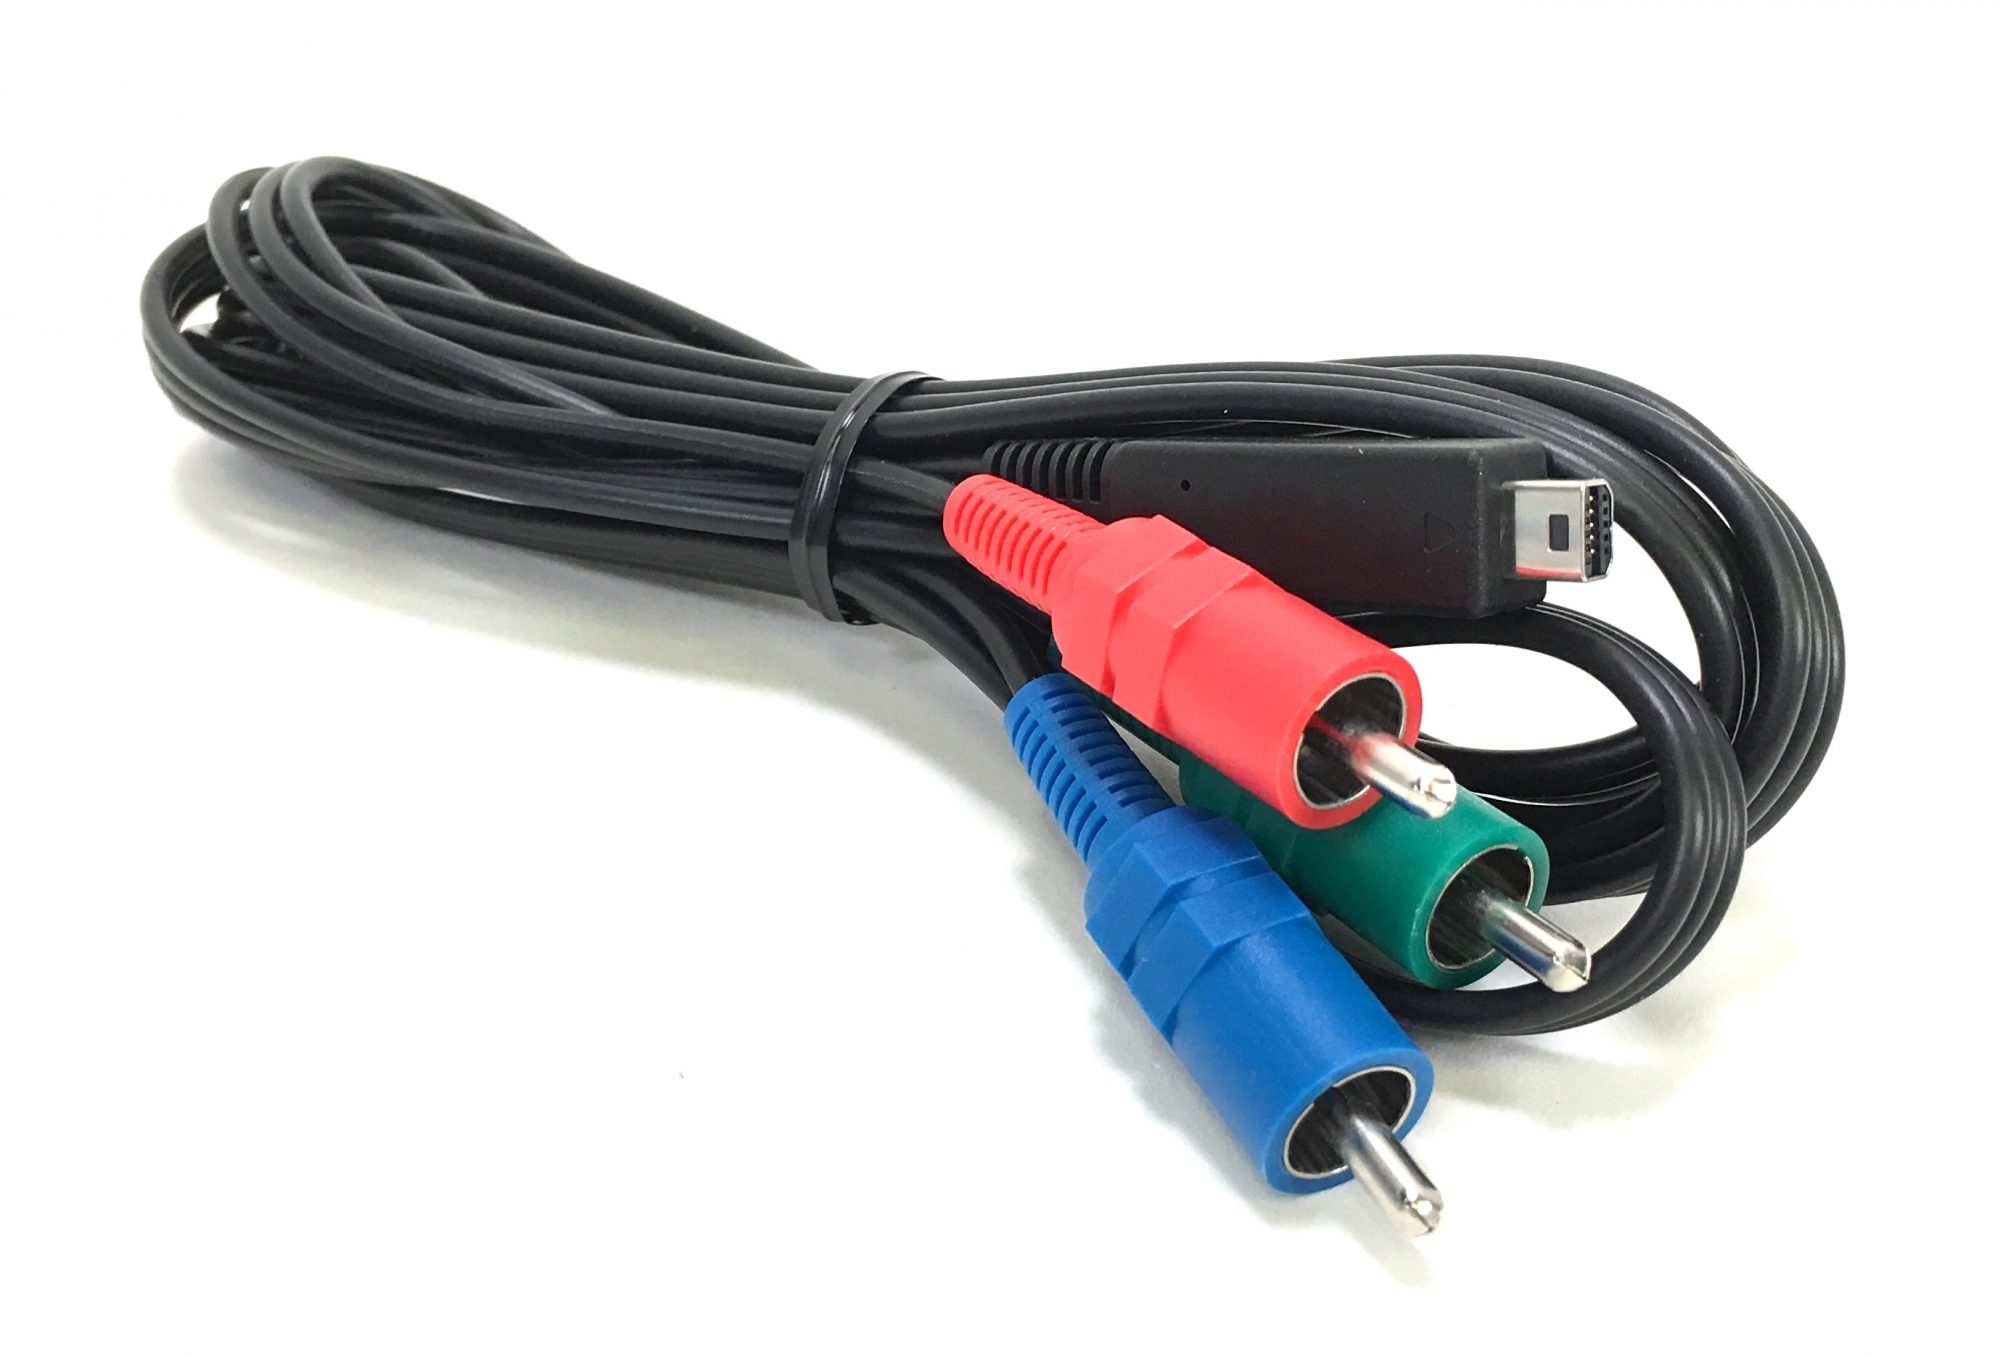 Original Component Video Cable that came with the Sony HVR-Z1U camcorder. It is a genuine Sony part, sourced directly from Sony USA. Brand new factory fresh. Free Shipping.